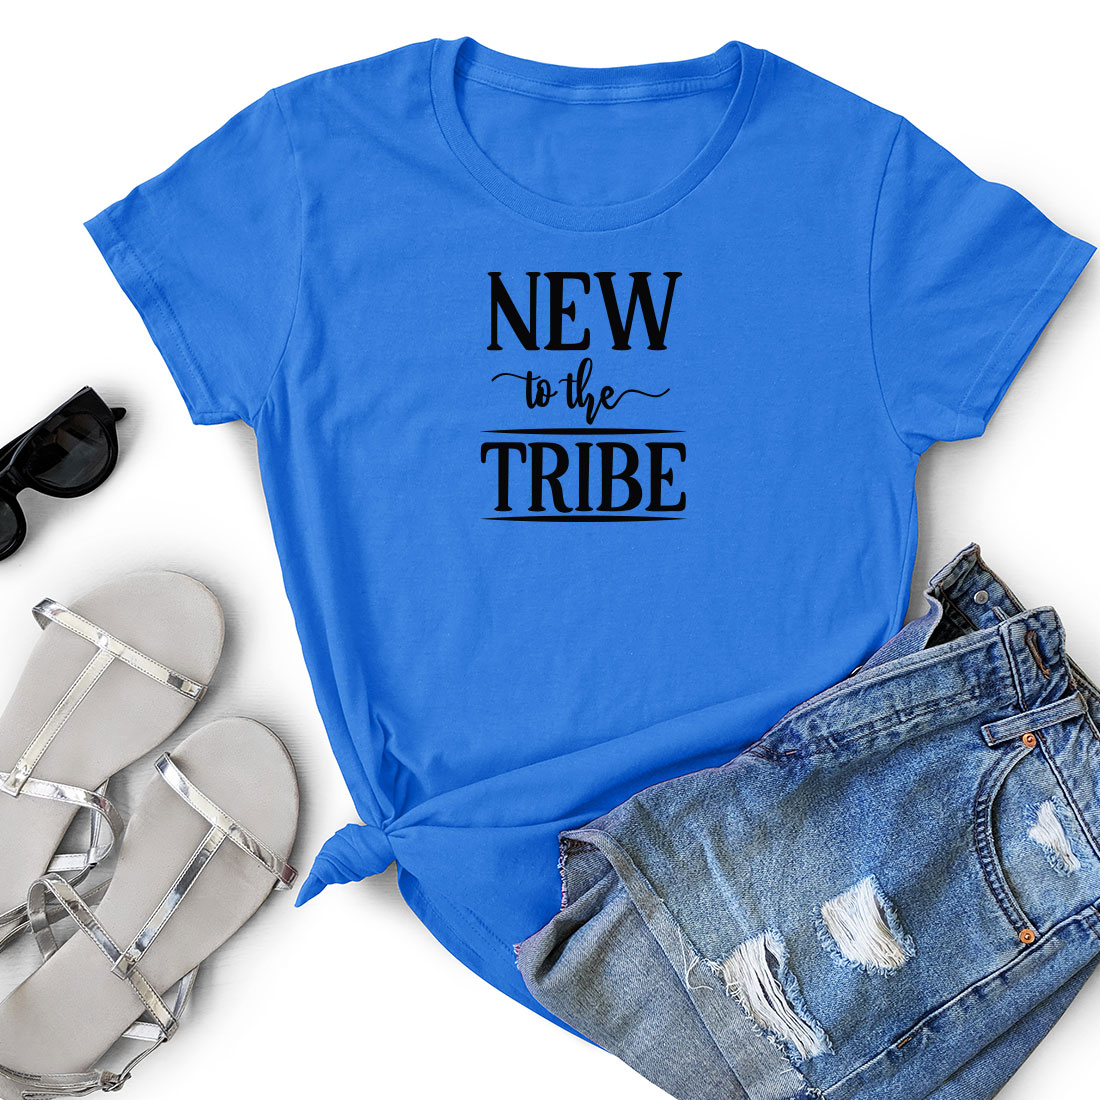 T - shirt that says new to the tribe next to a pair of shorts.